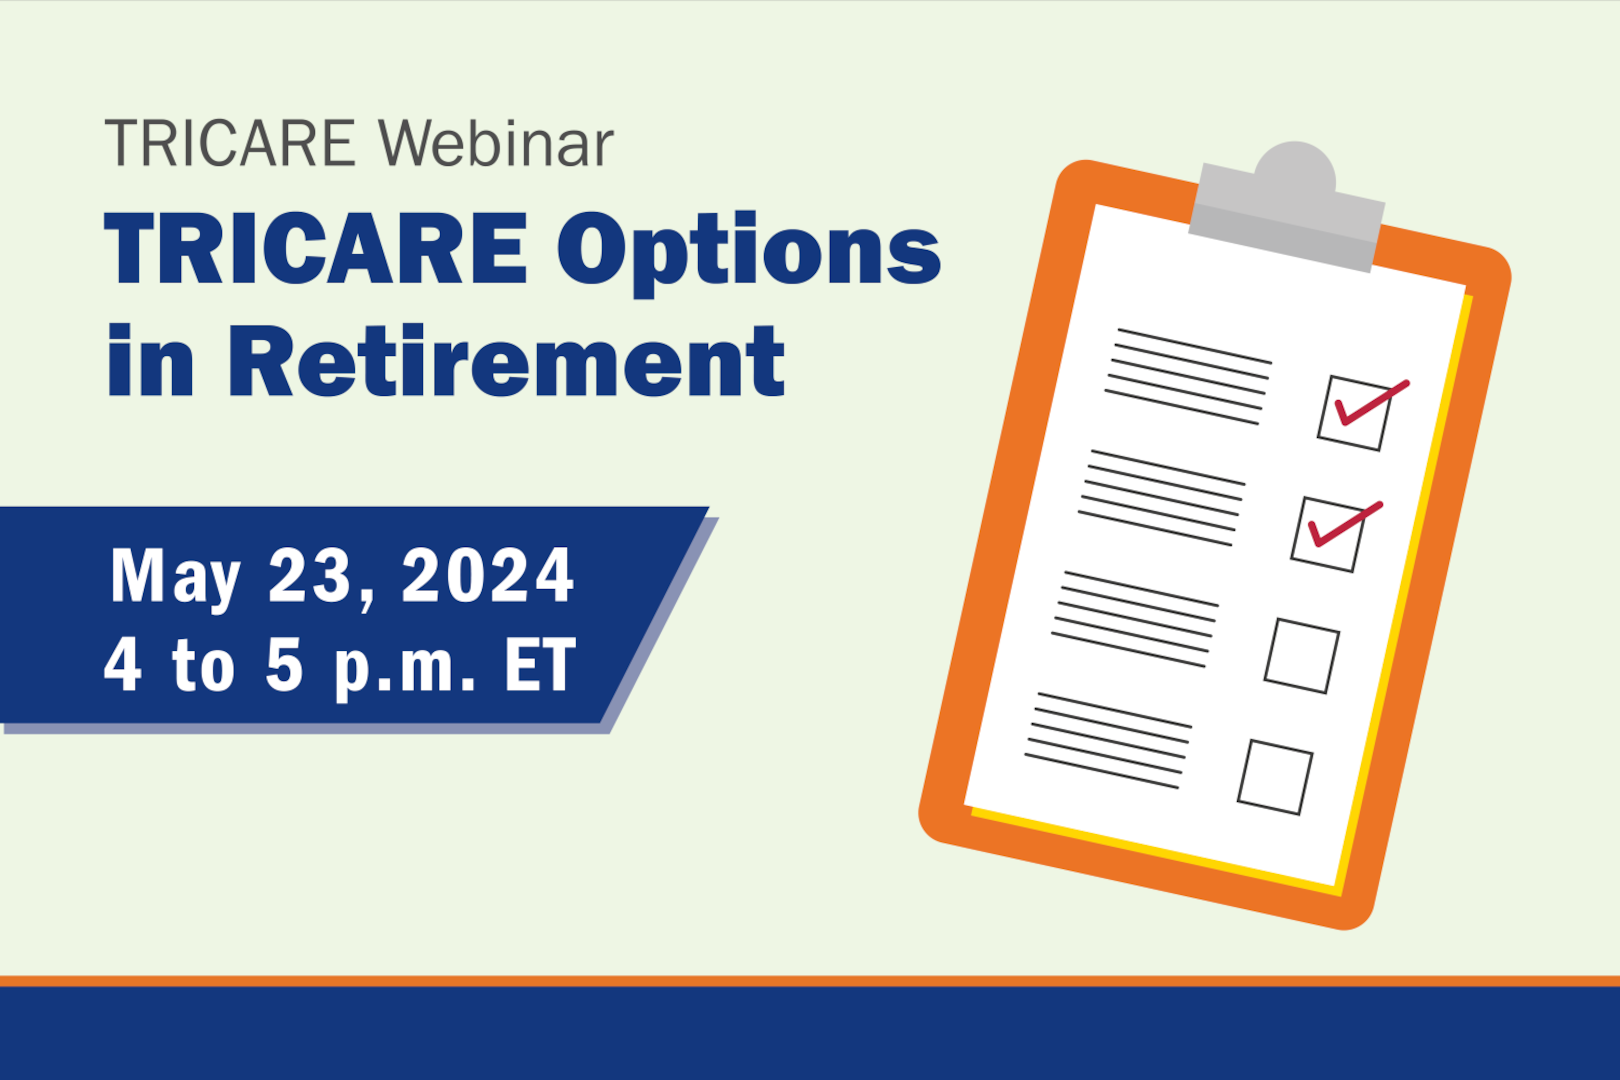 Get your TRICARE questions answered at the May 23 webinar for retirees